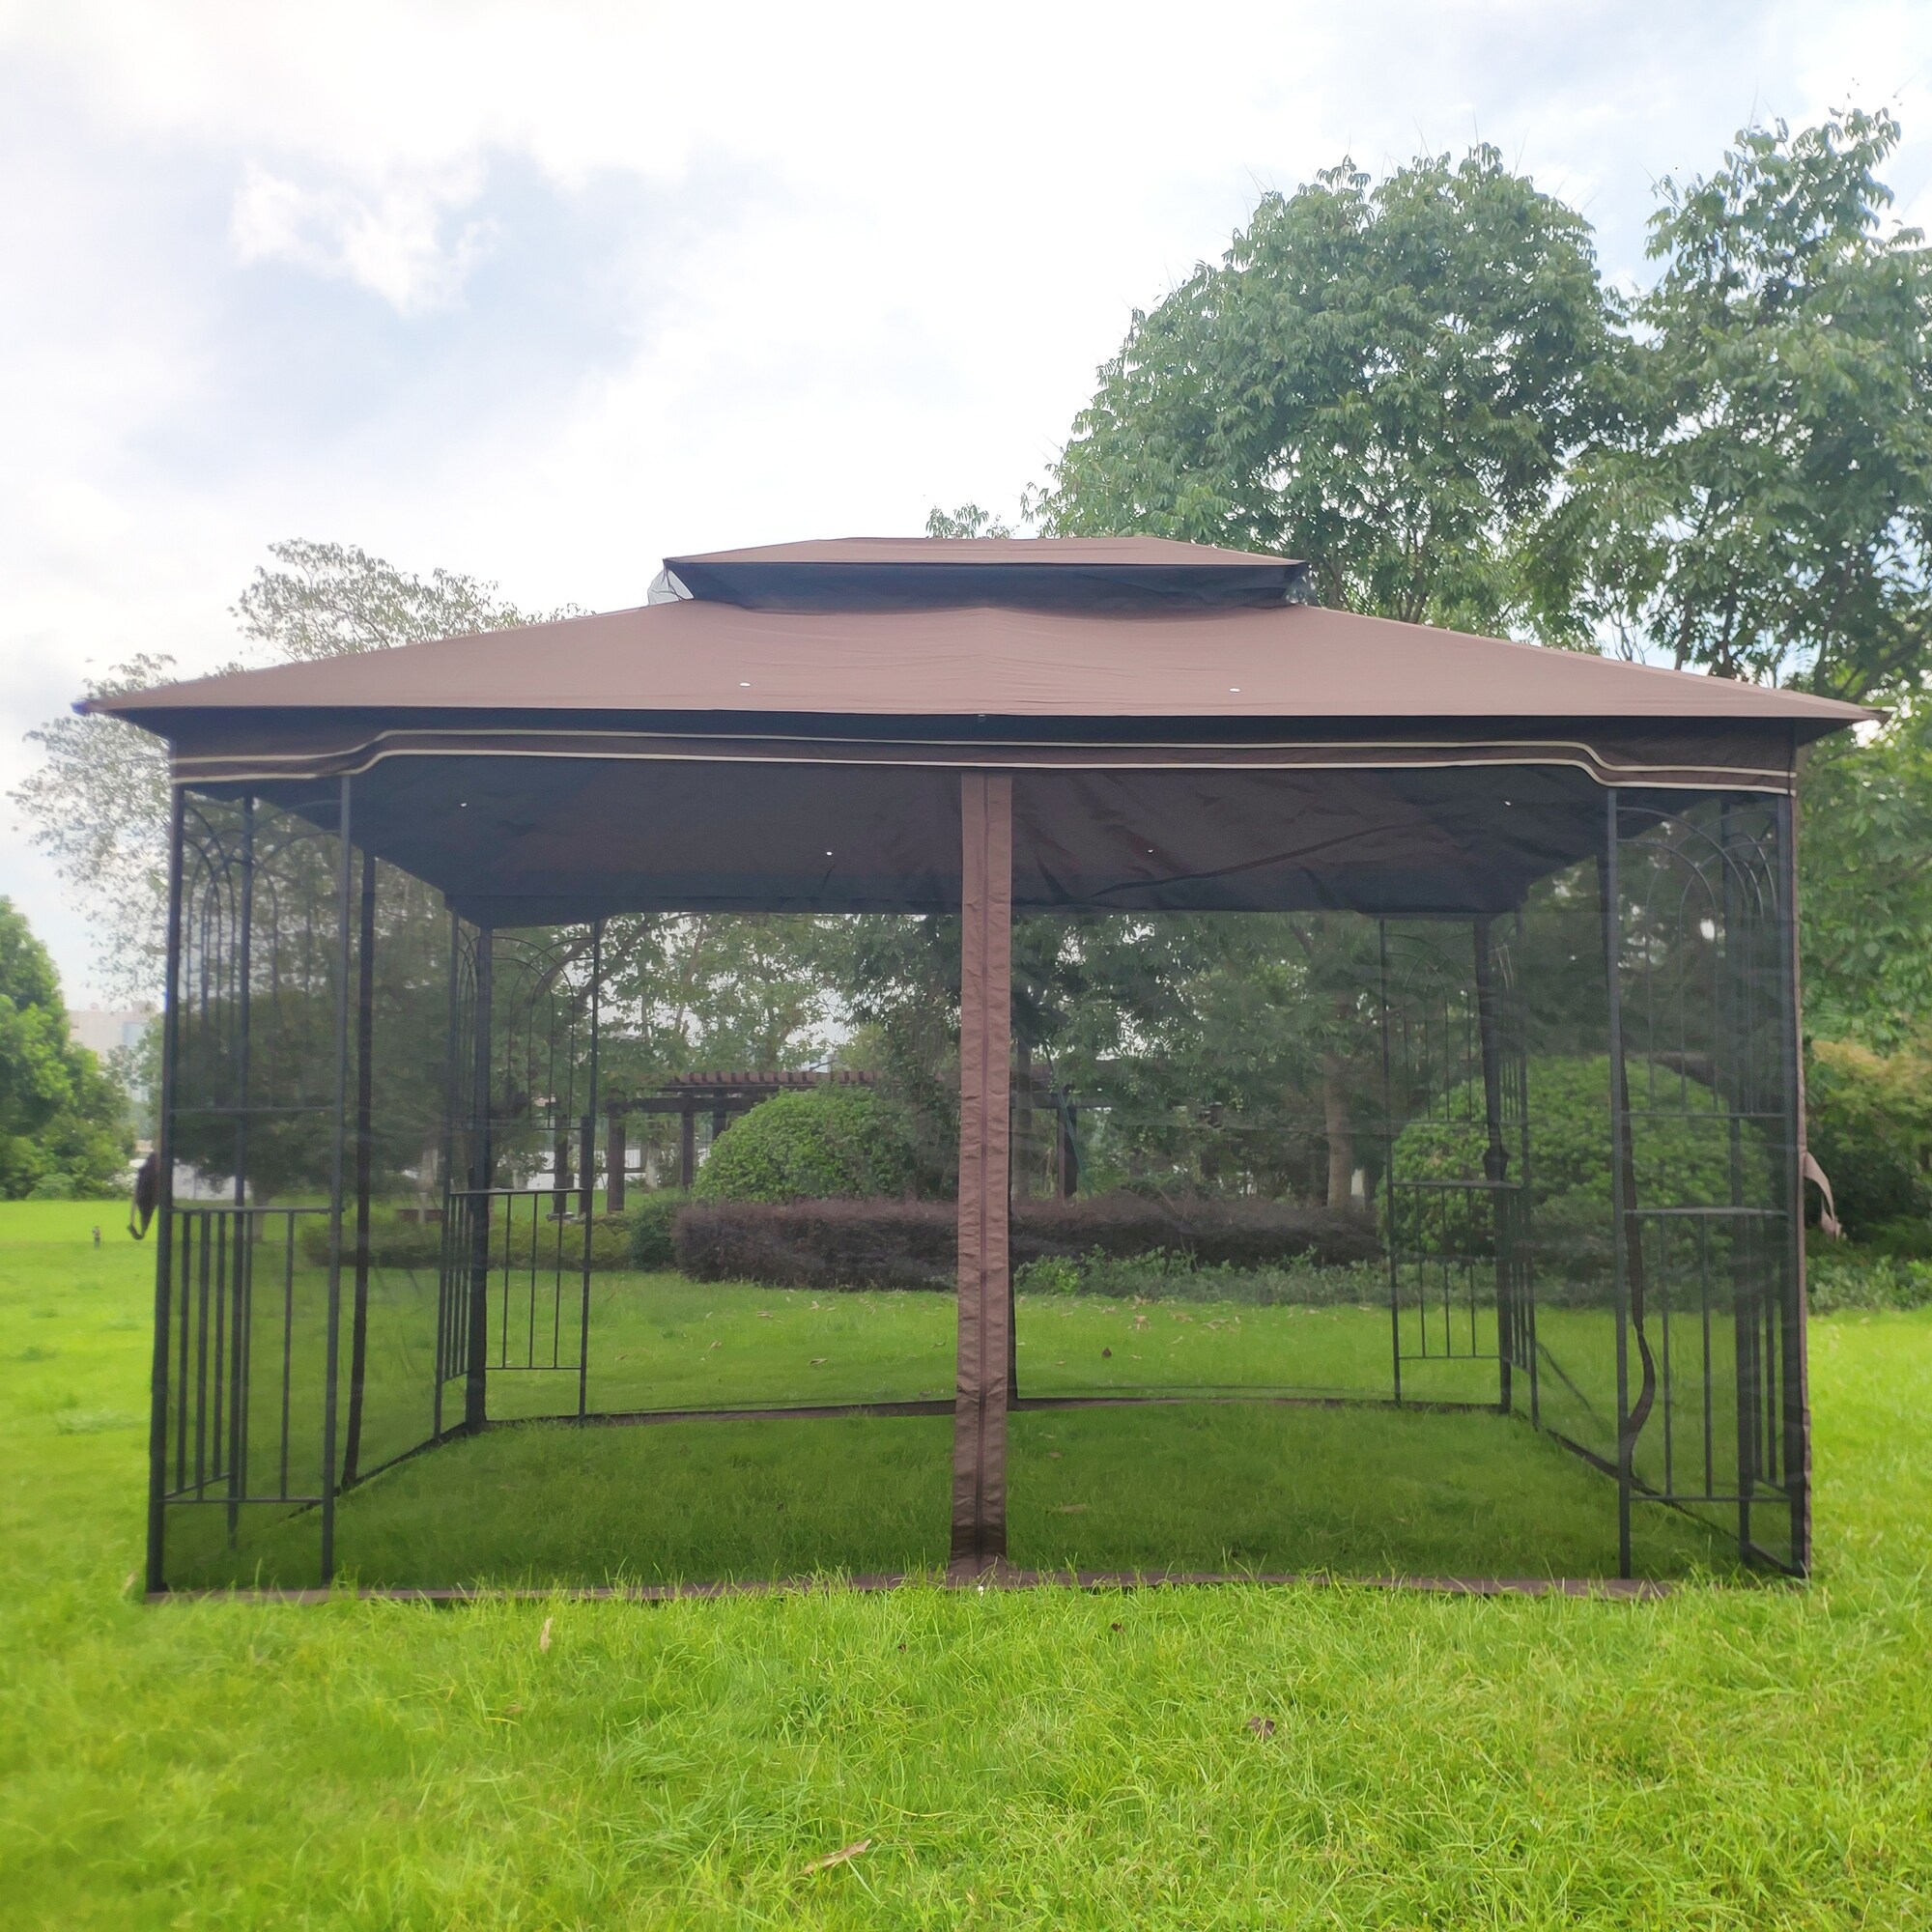 13' x10' Outdoor Patio Gazebo with Ventilated Double Roof & Detachable Mosquito Net, Suitable for Lawn, Garden, Backyard & Deck